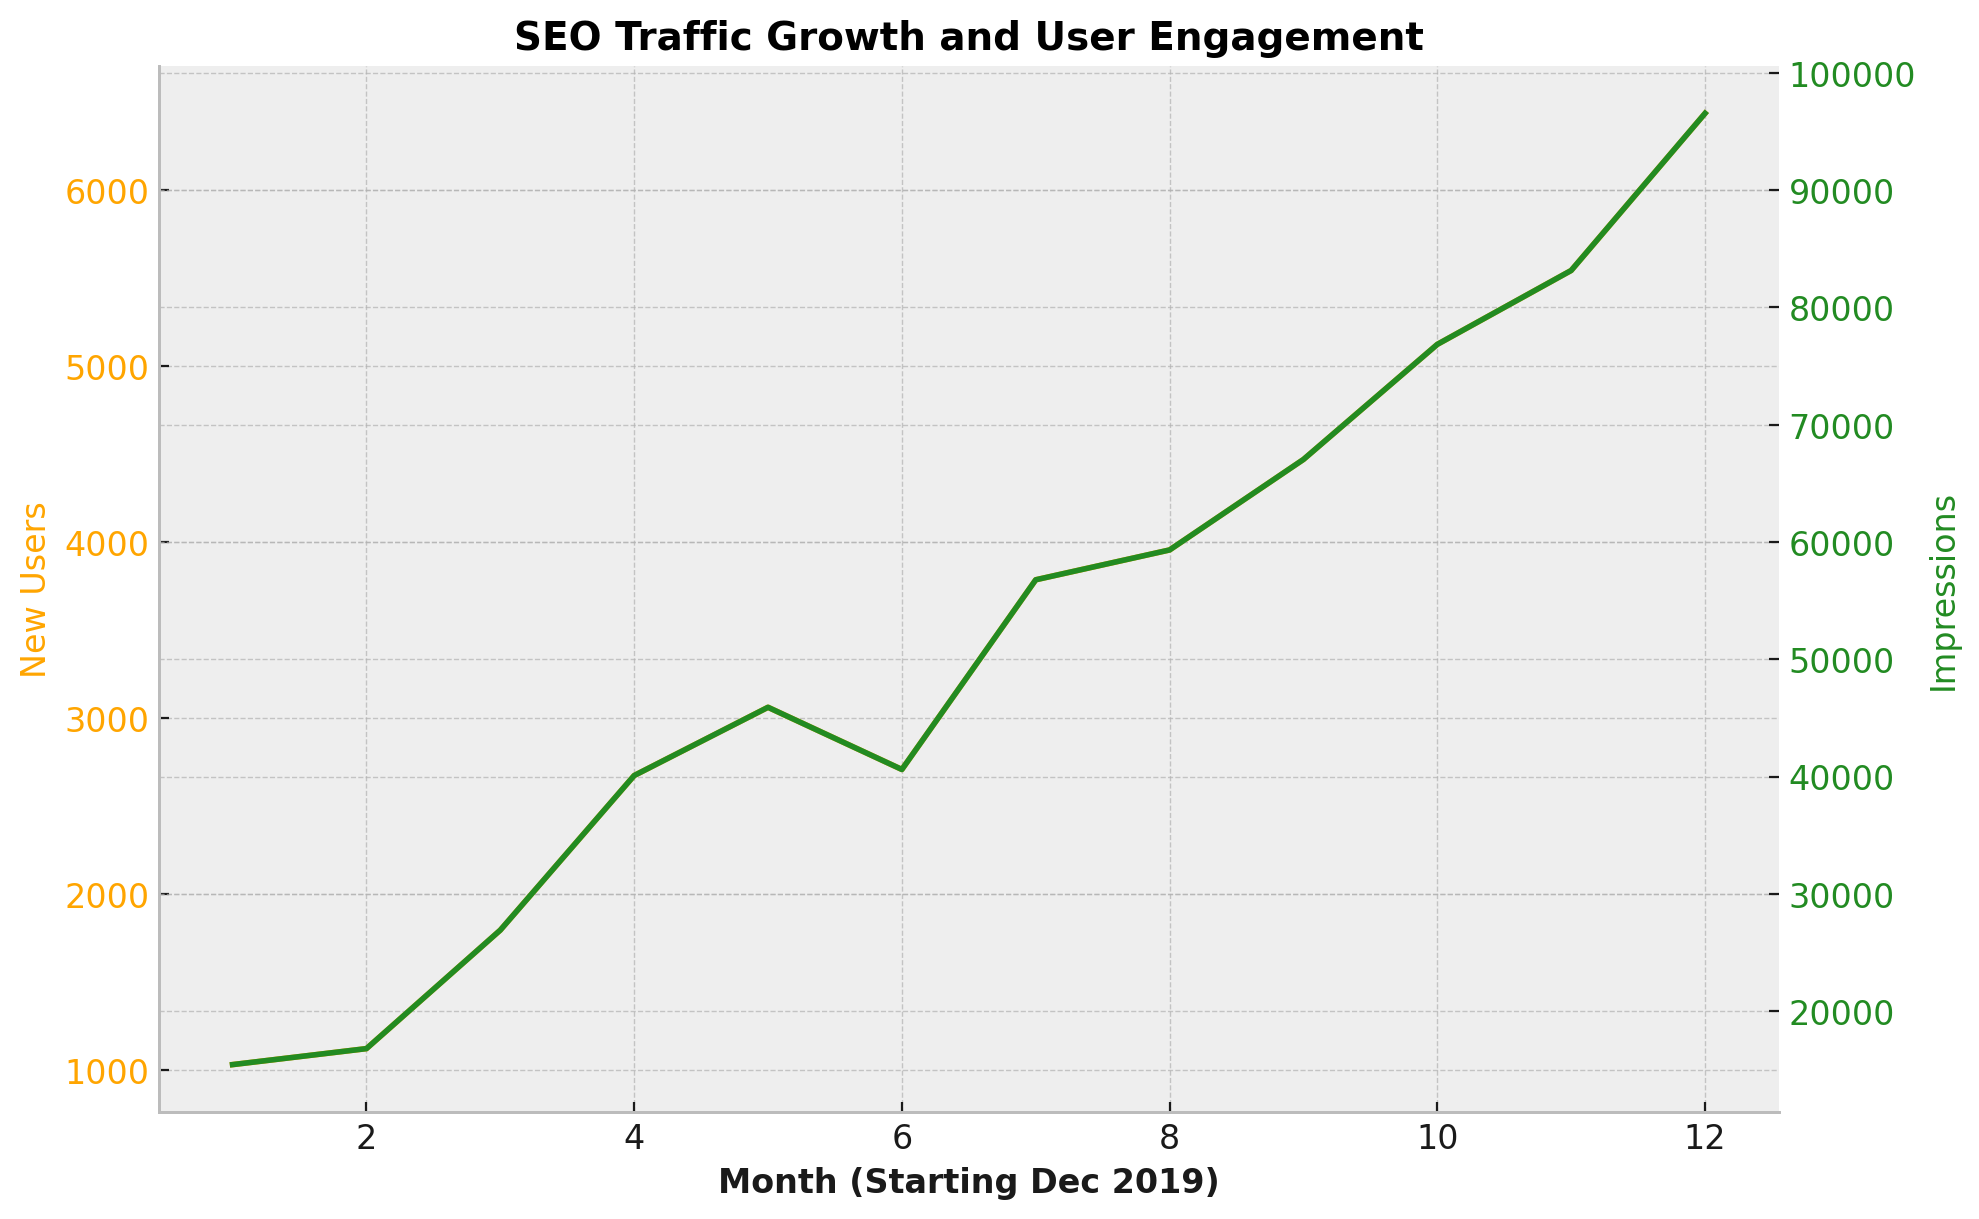 SEO Traffic Growth and User Engagement